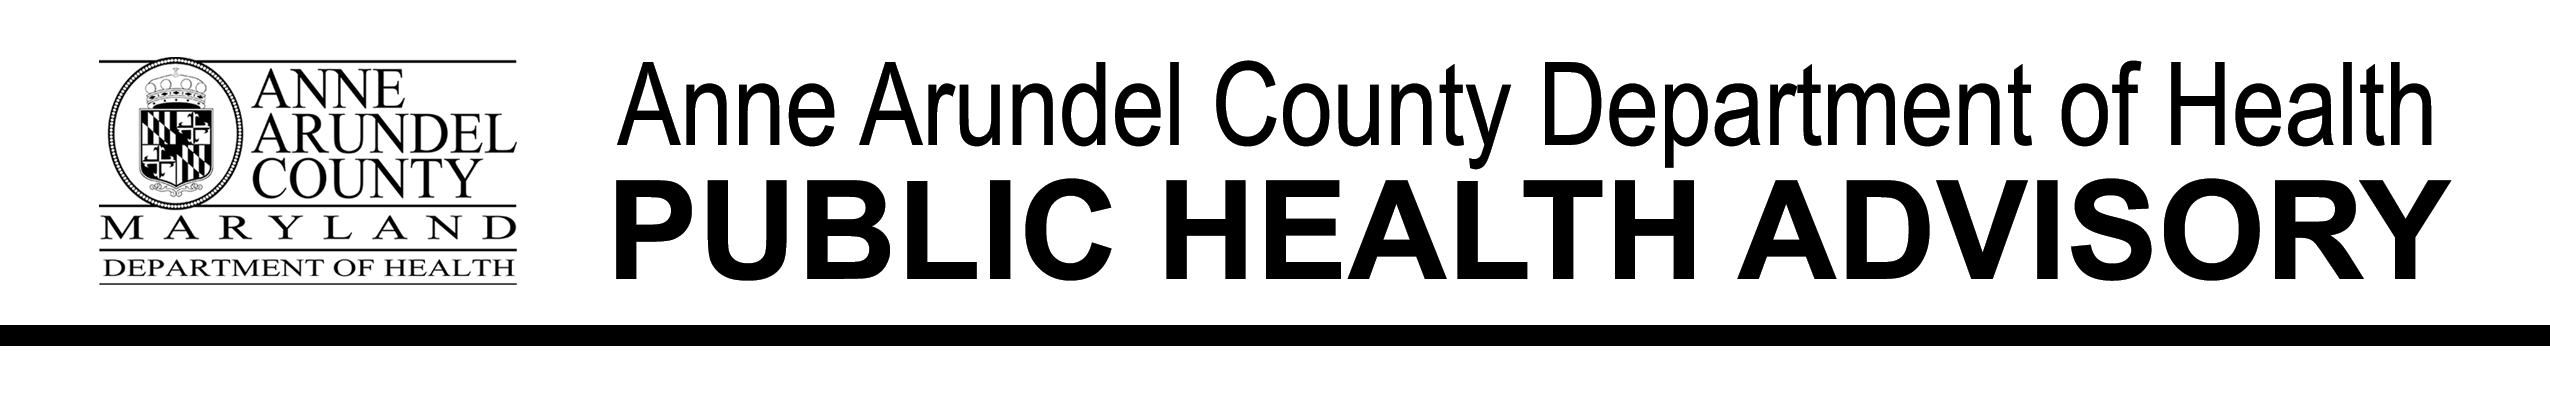 Anne Arundel County Department of Health Logo